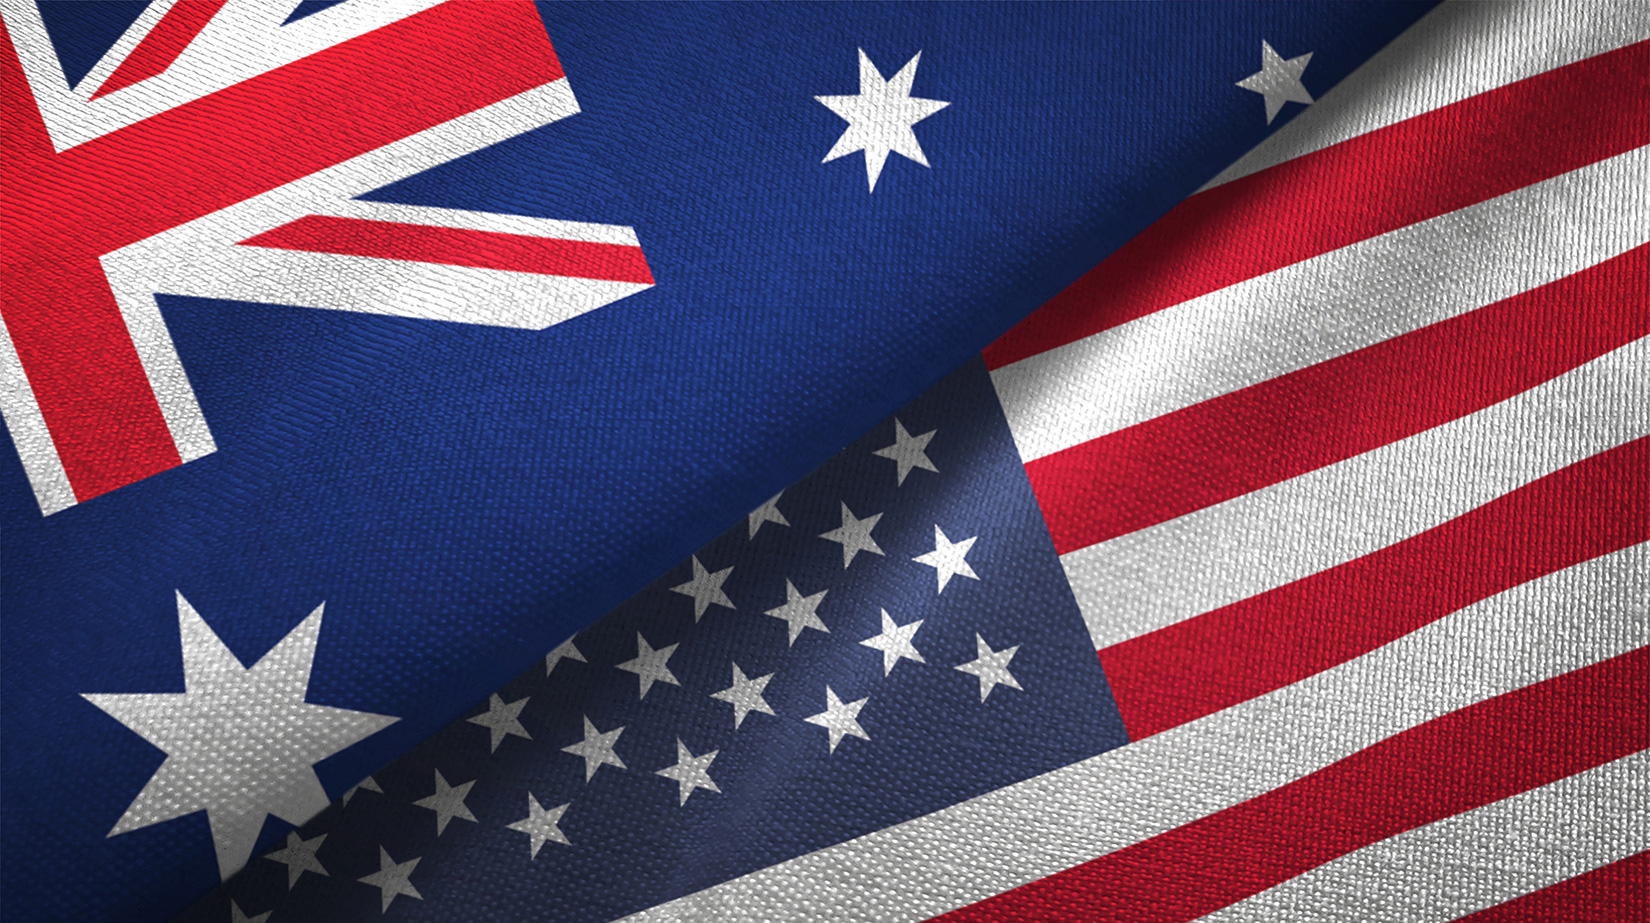 Re-assessing Australia’s Intra-alliance Bargaining Power in the Age of Trump